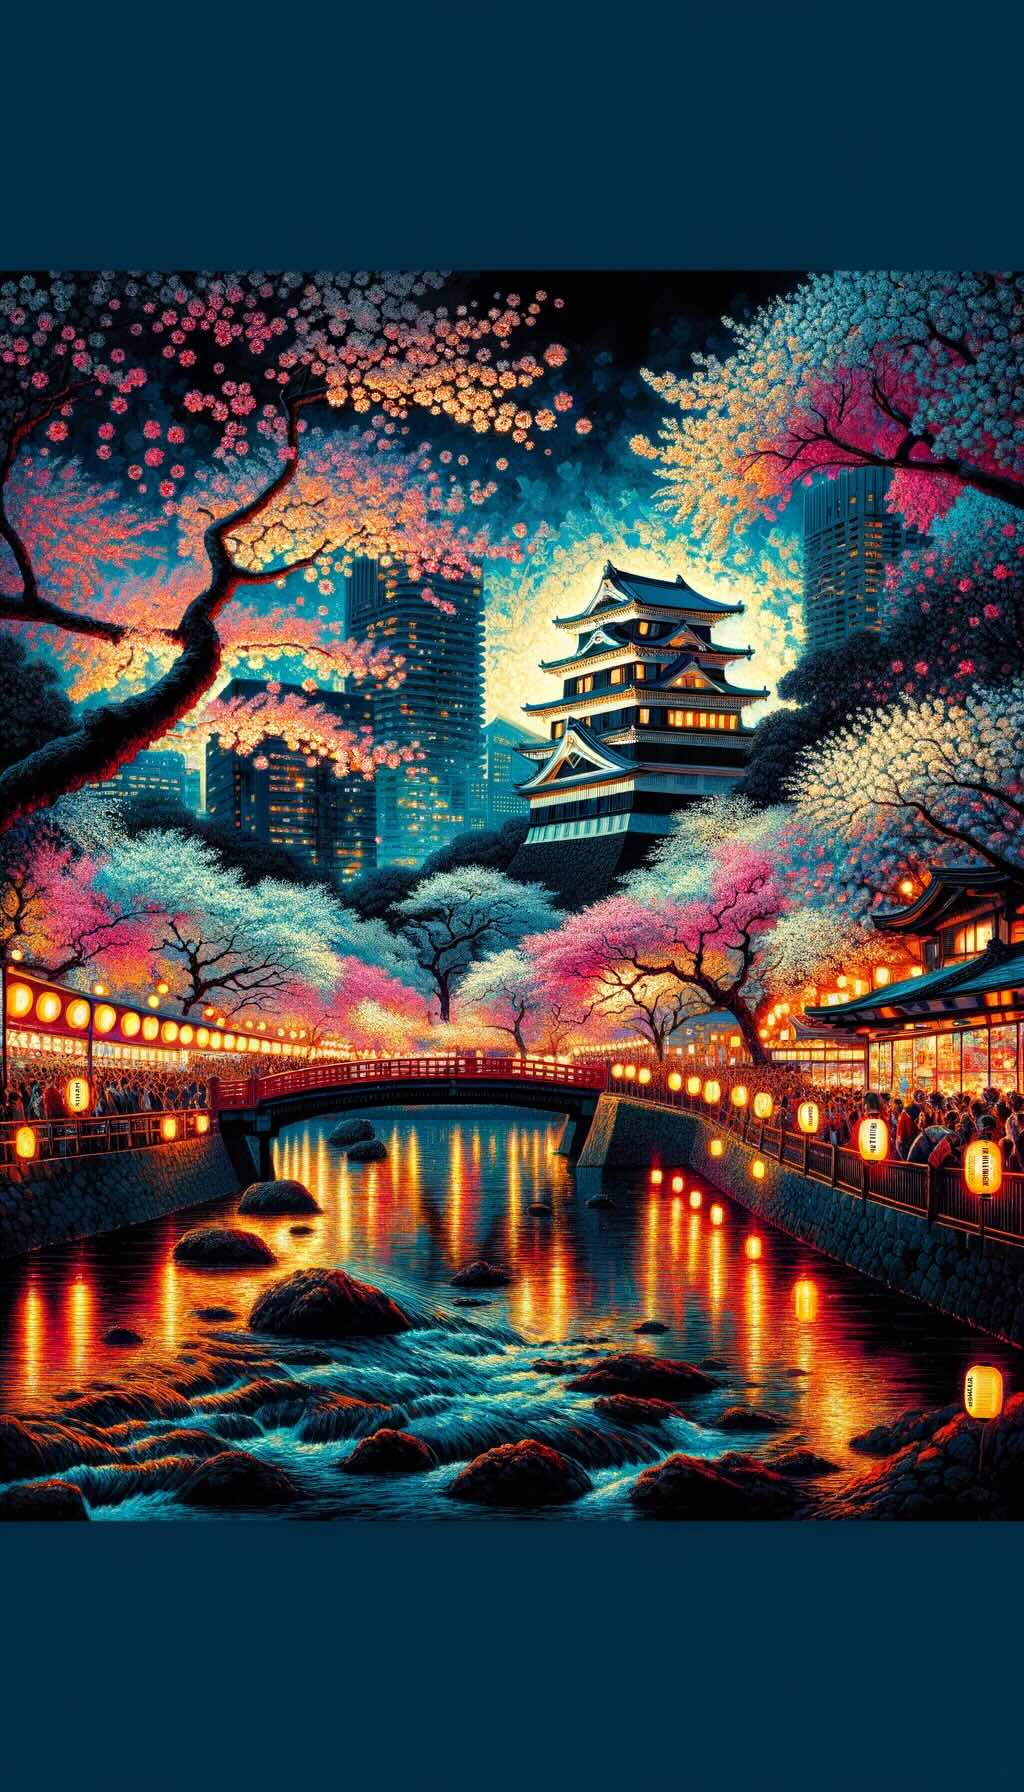 Enchanting scenes of nighttime cherry blossom viewing, or 'yozakura', in Japan captures the magical and surreal ambiance of illuminated sakura against the night sky, showcasing iconic locations like Ueno Park, Meguro River, and Nijo Castle. 